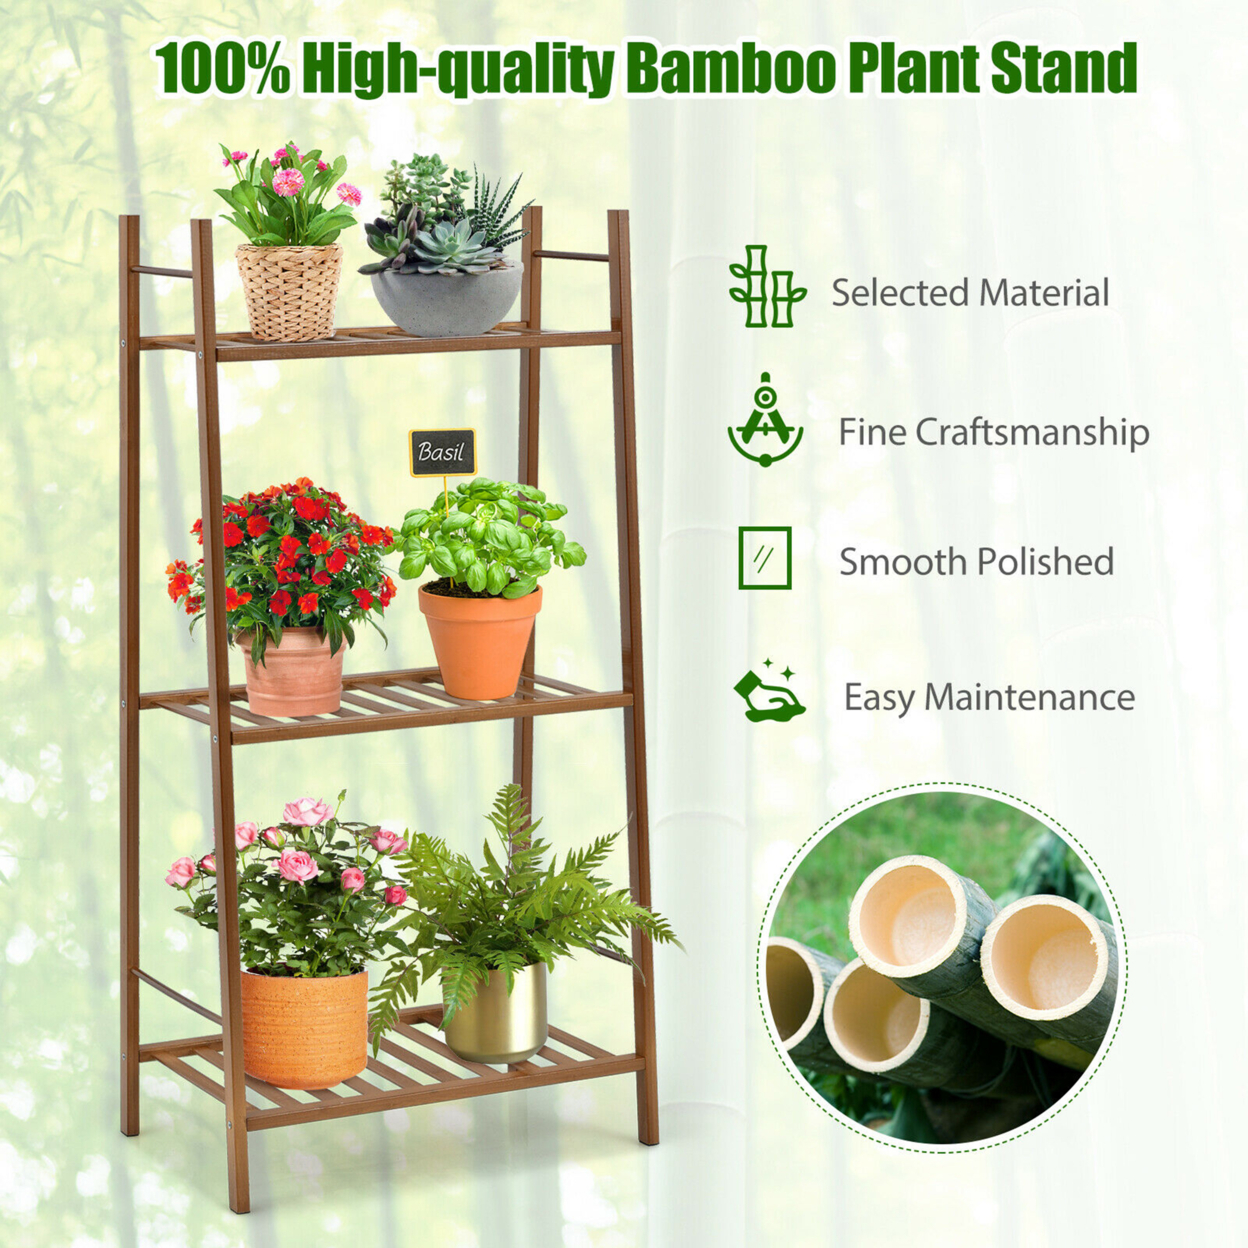 Bamboo Plant Stand 3 Tiers Plant Rack Vertical Tiered Plant Ladder Shelf - Natural